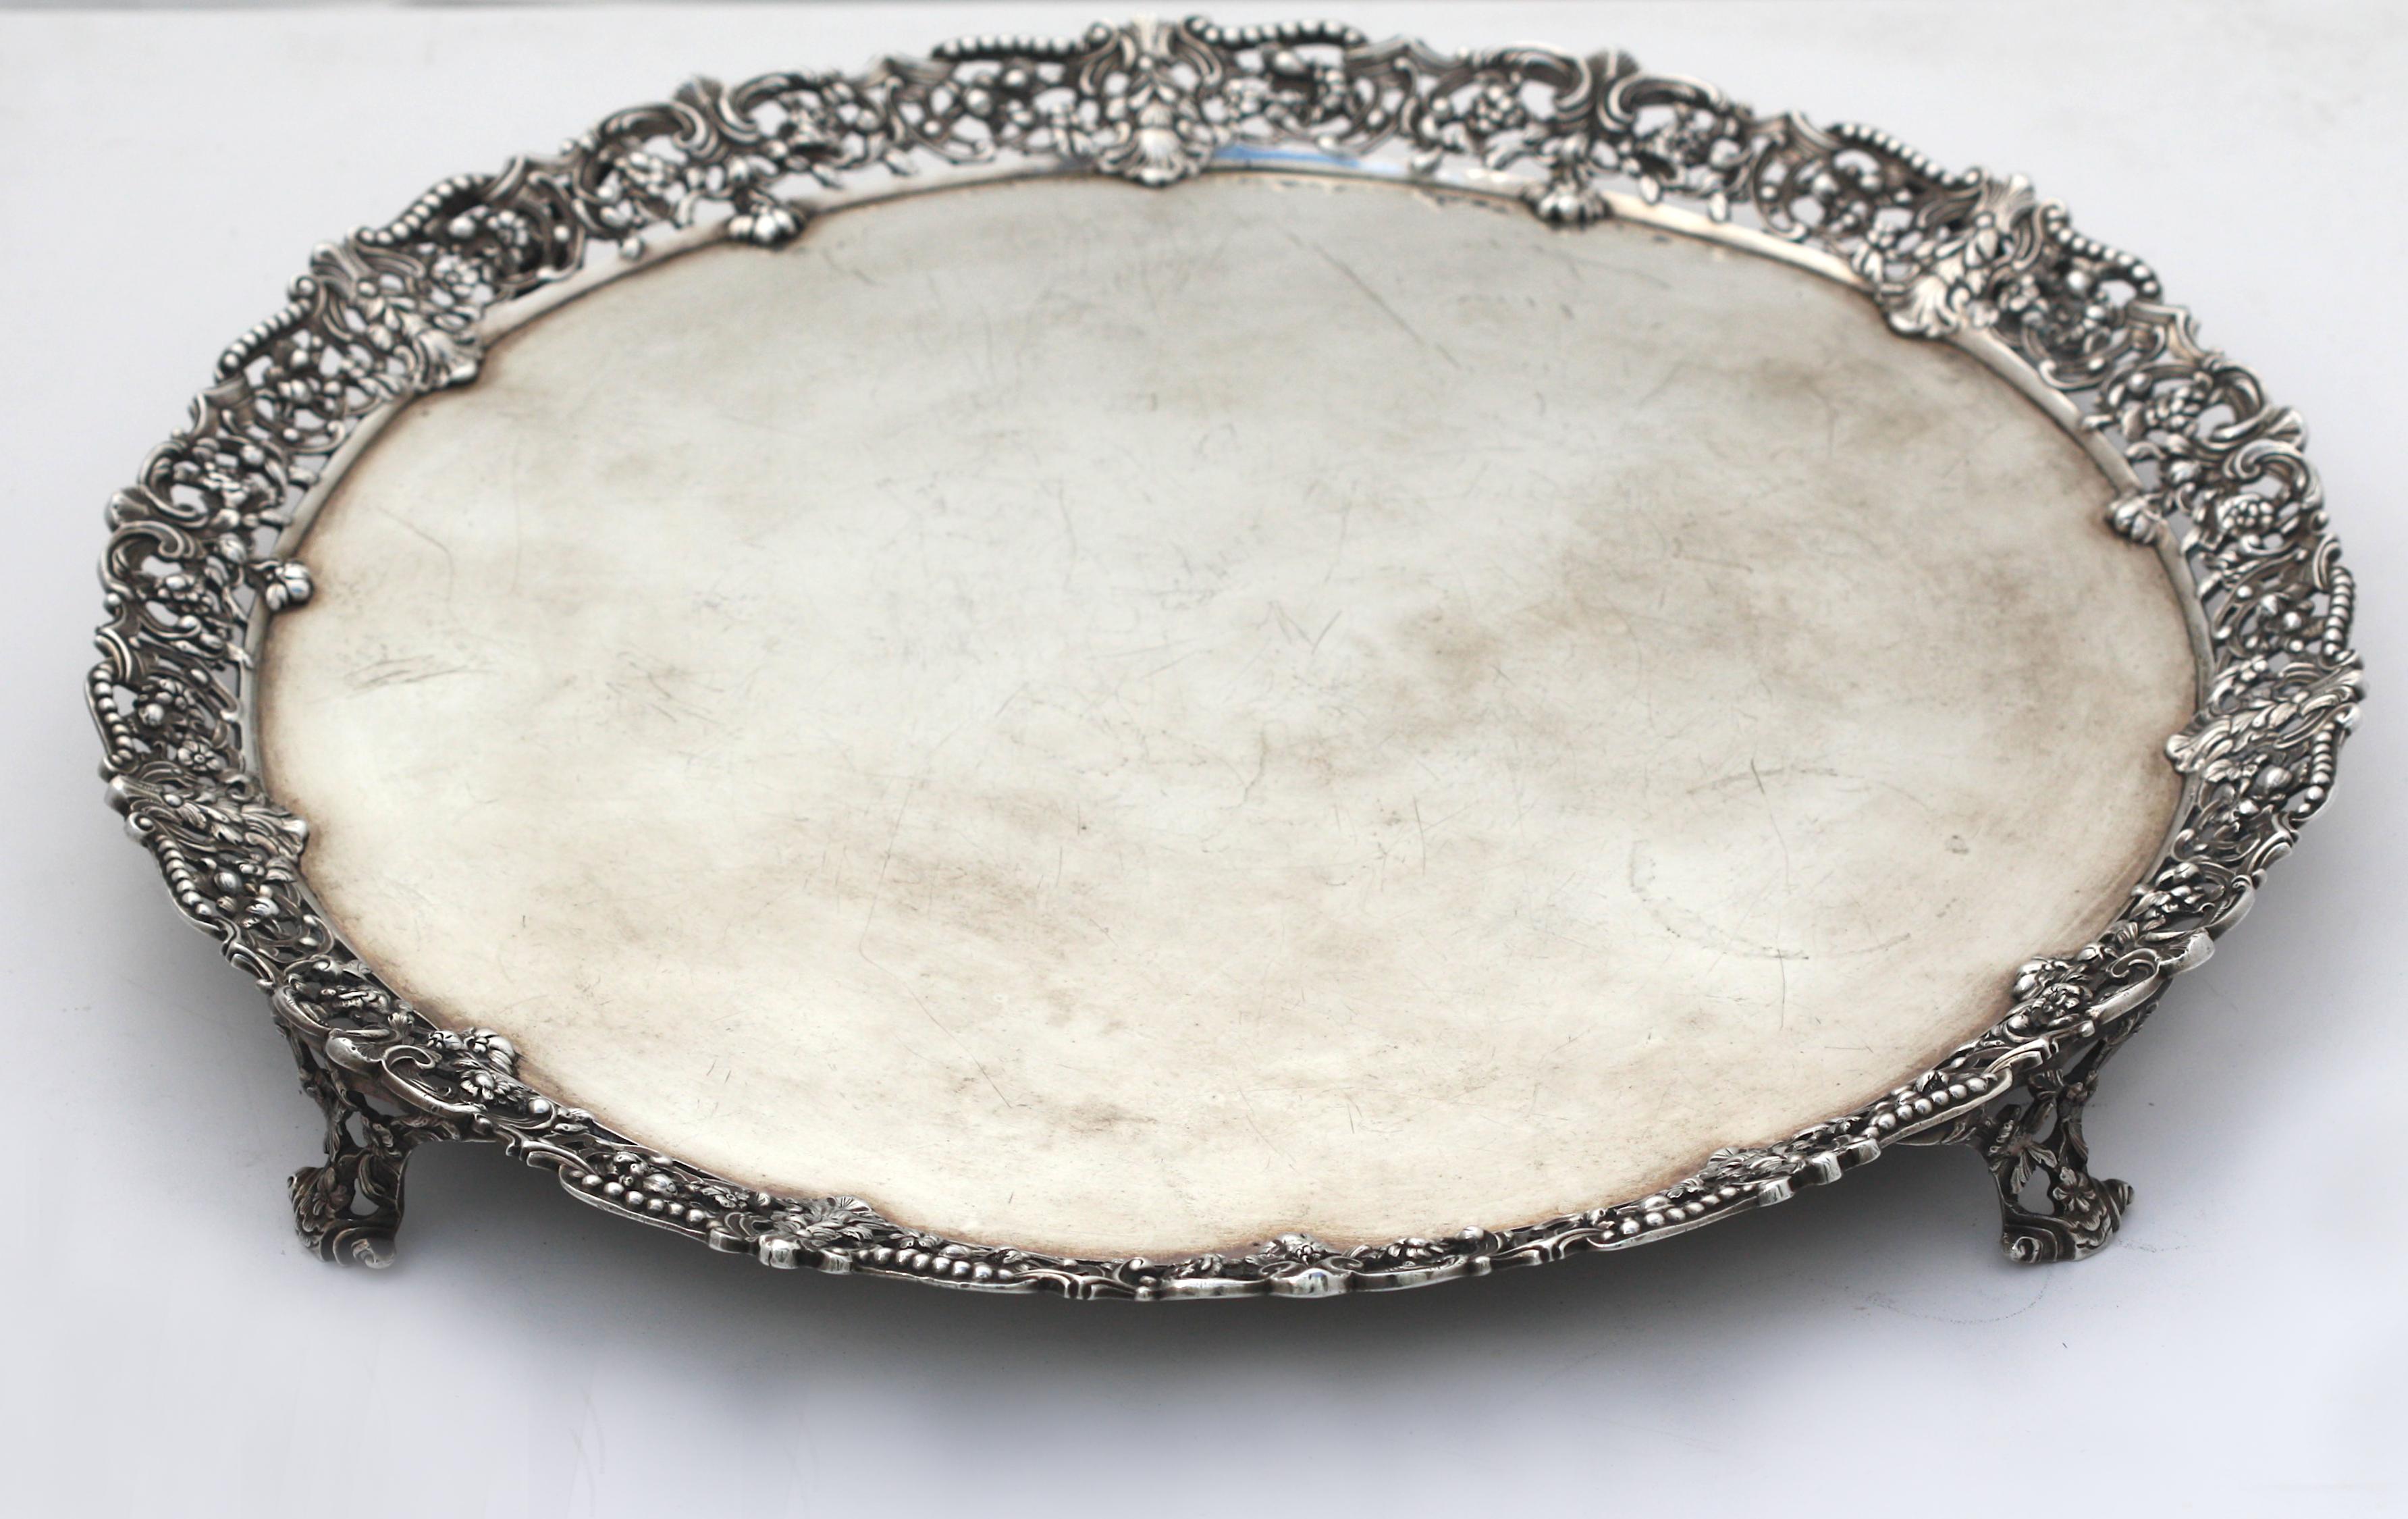 
George III Silver Circular Footed Serving Tray
Marked, London, circa 1760, maker Richard Rugg. The applied border cast with open foliage interlaced scrolls and partial bead borders, on four open scrolled feet.
Height 1.75 in., Diameter 16 in.